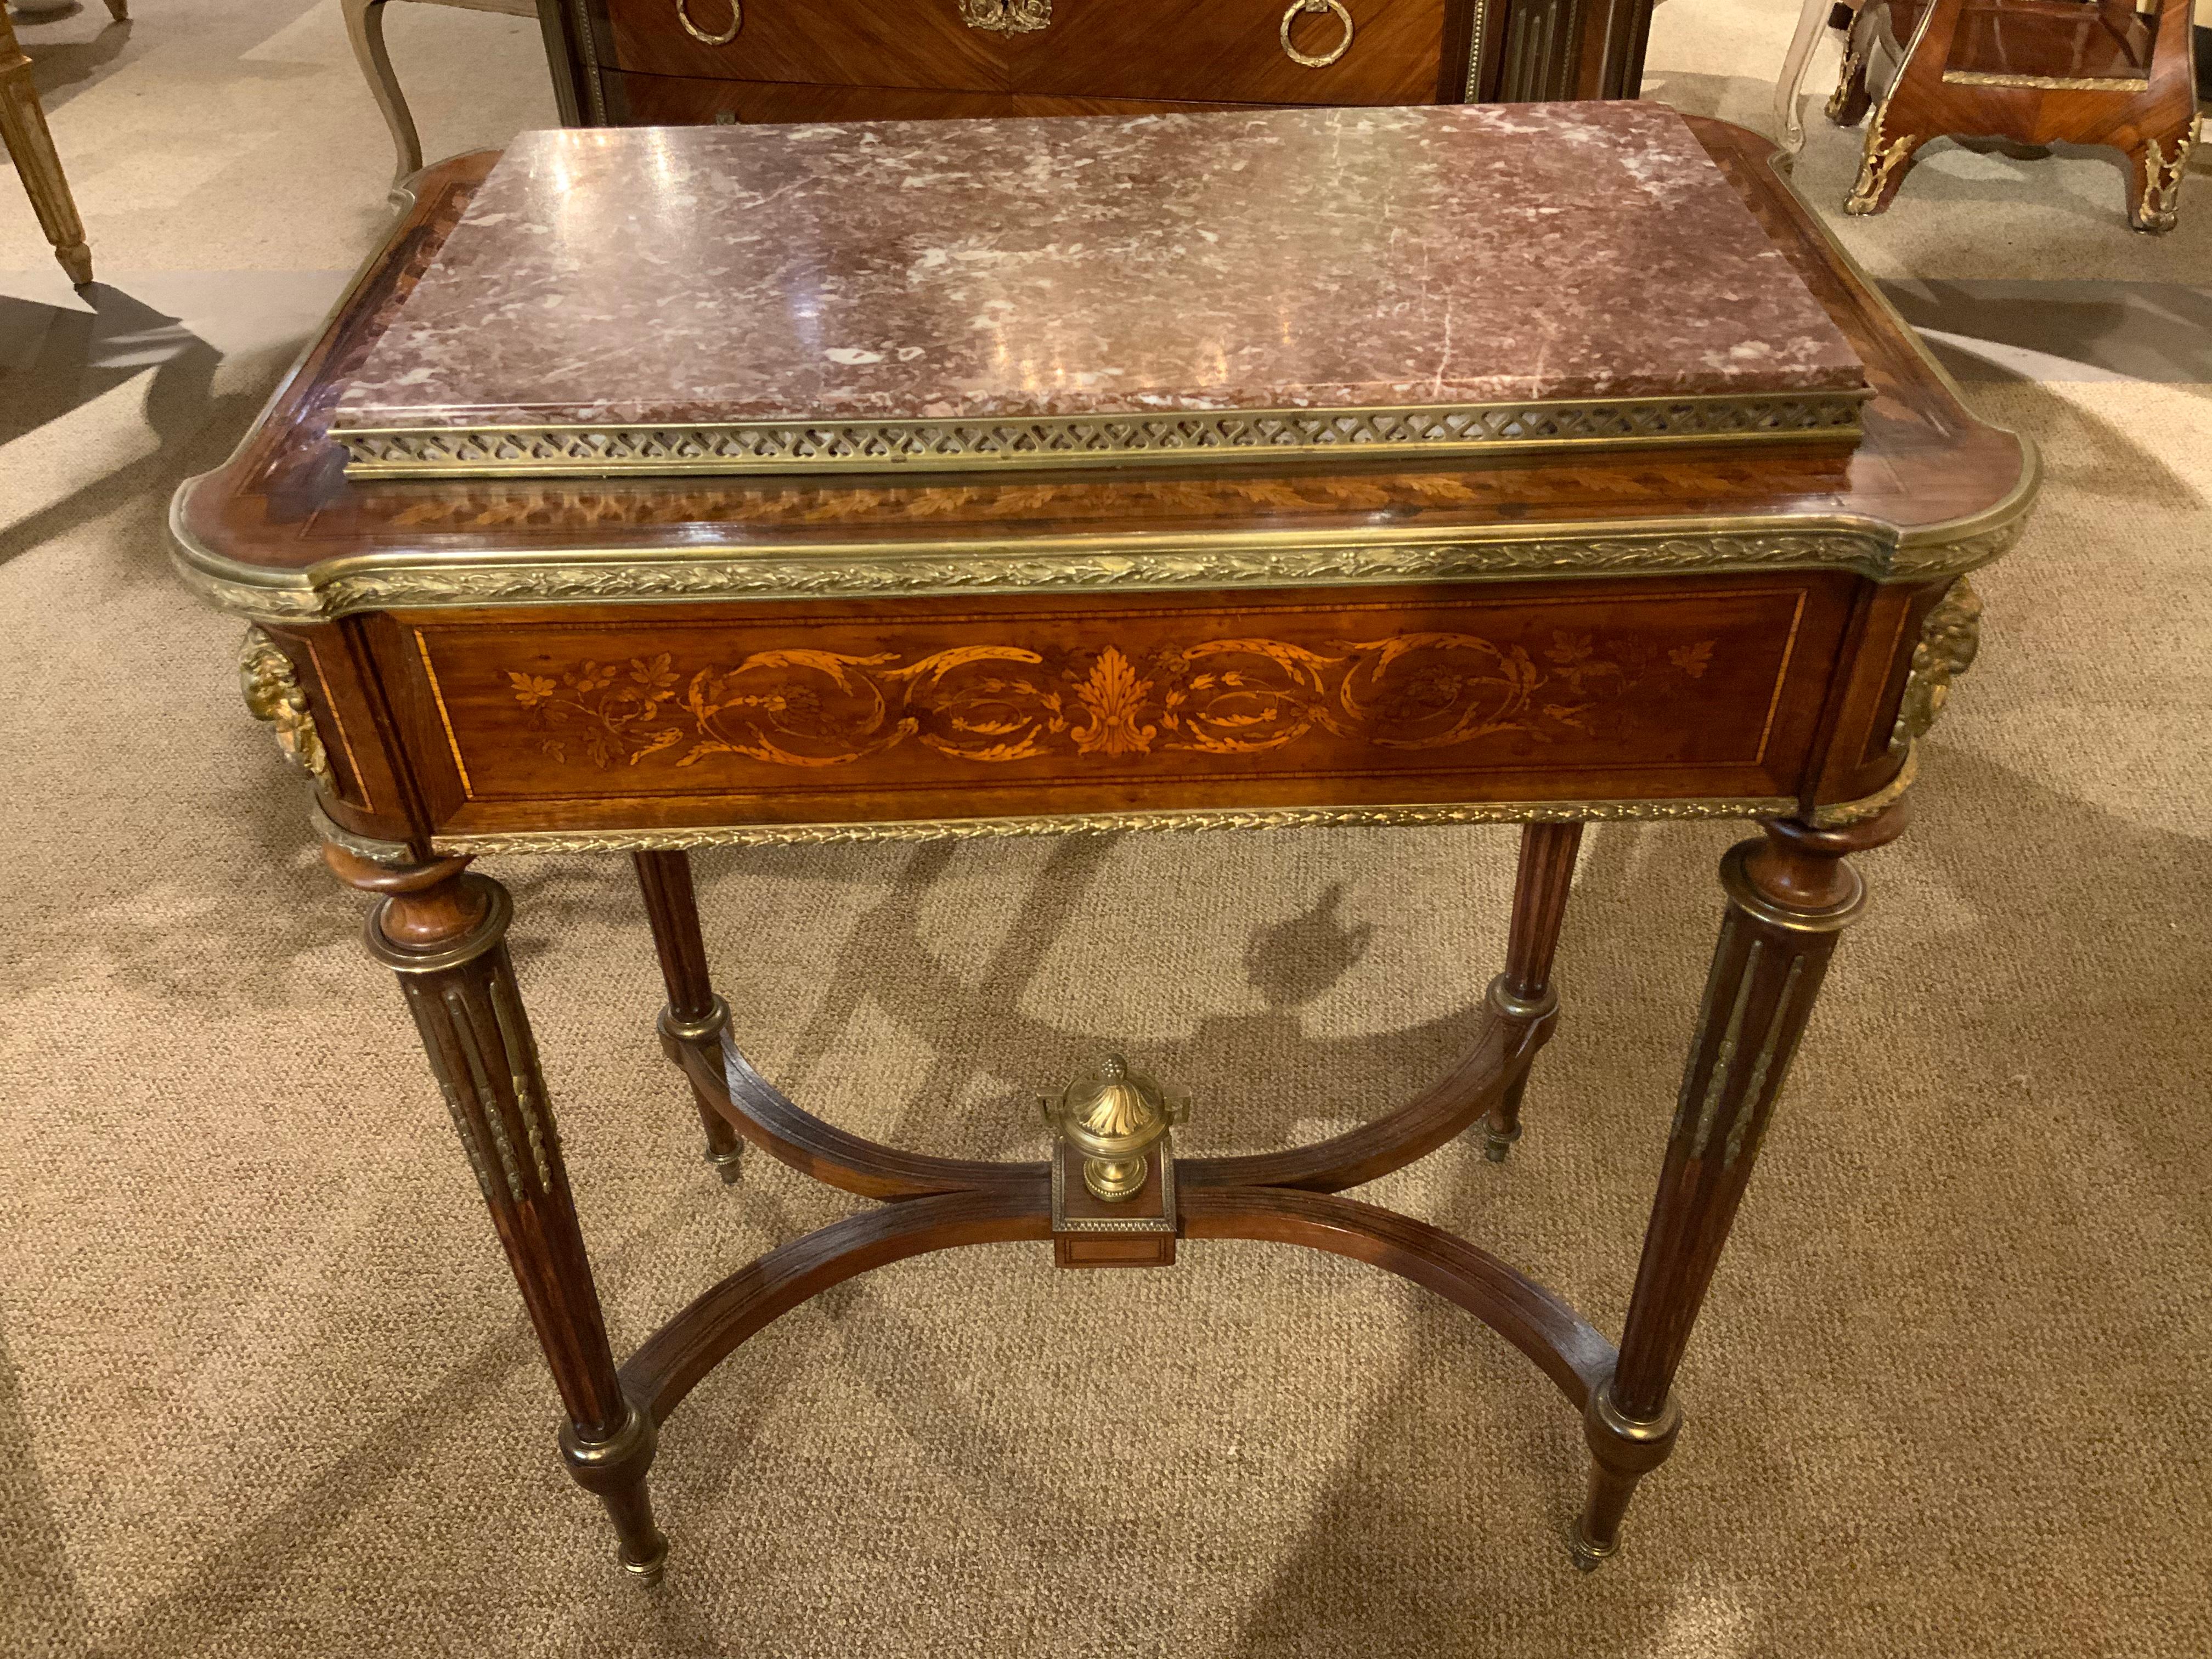 The exceptional construction and fine cabinetry makes this
Special. The quality of the inlaid marquetry is also beautifully 
Done. The grill work is a soft gold hue and adds a special
Design touch to this side table. It is raised on tapering